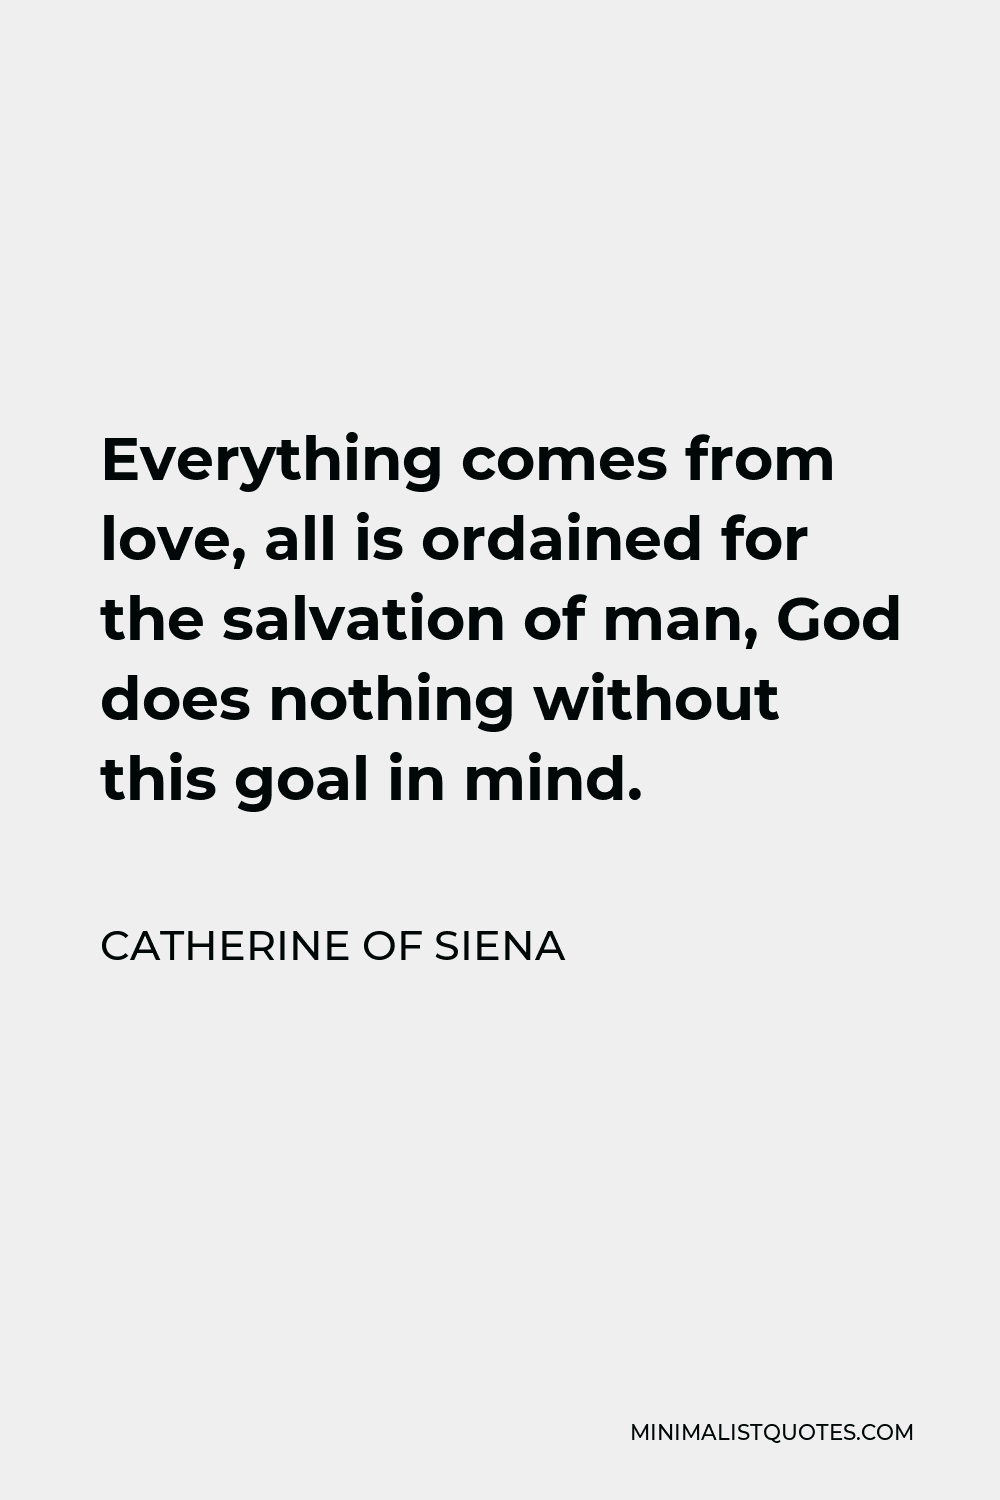 Catherine of Siena Quote - Everything comes from love, all is ordained for the salvation of man, God does nothing without this goal in mind.